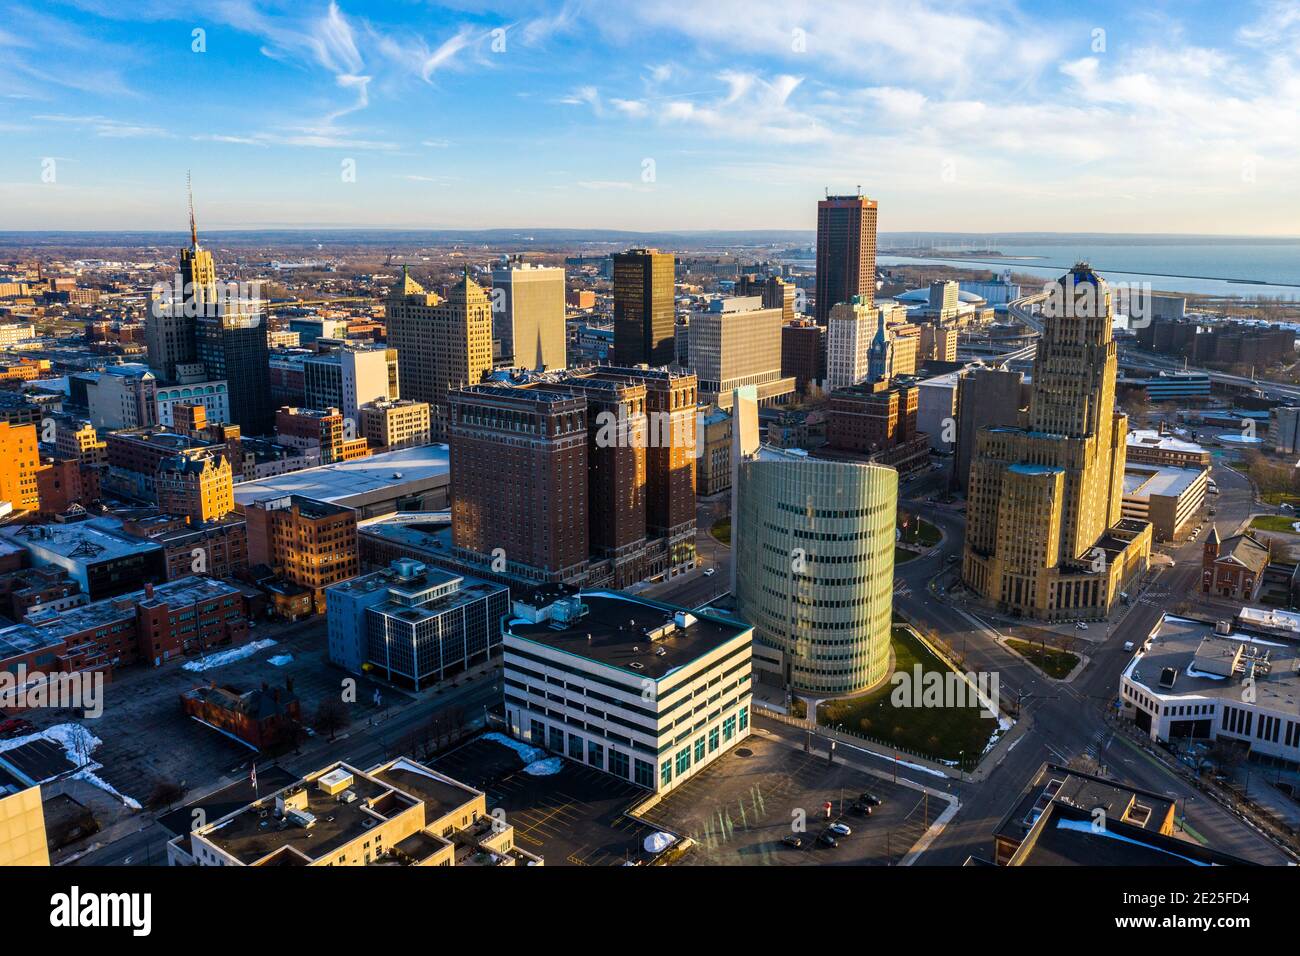 Downtown Buffalo Ny High Resolution Stock Photography and Images - Alamy